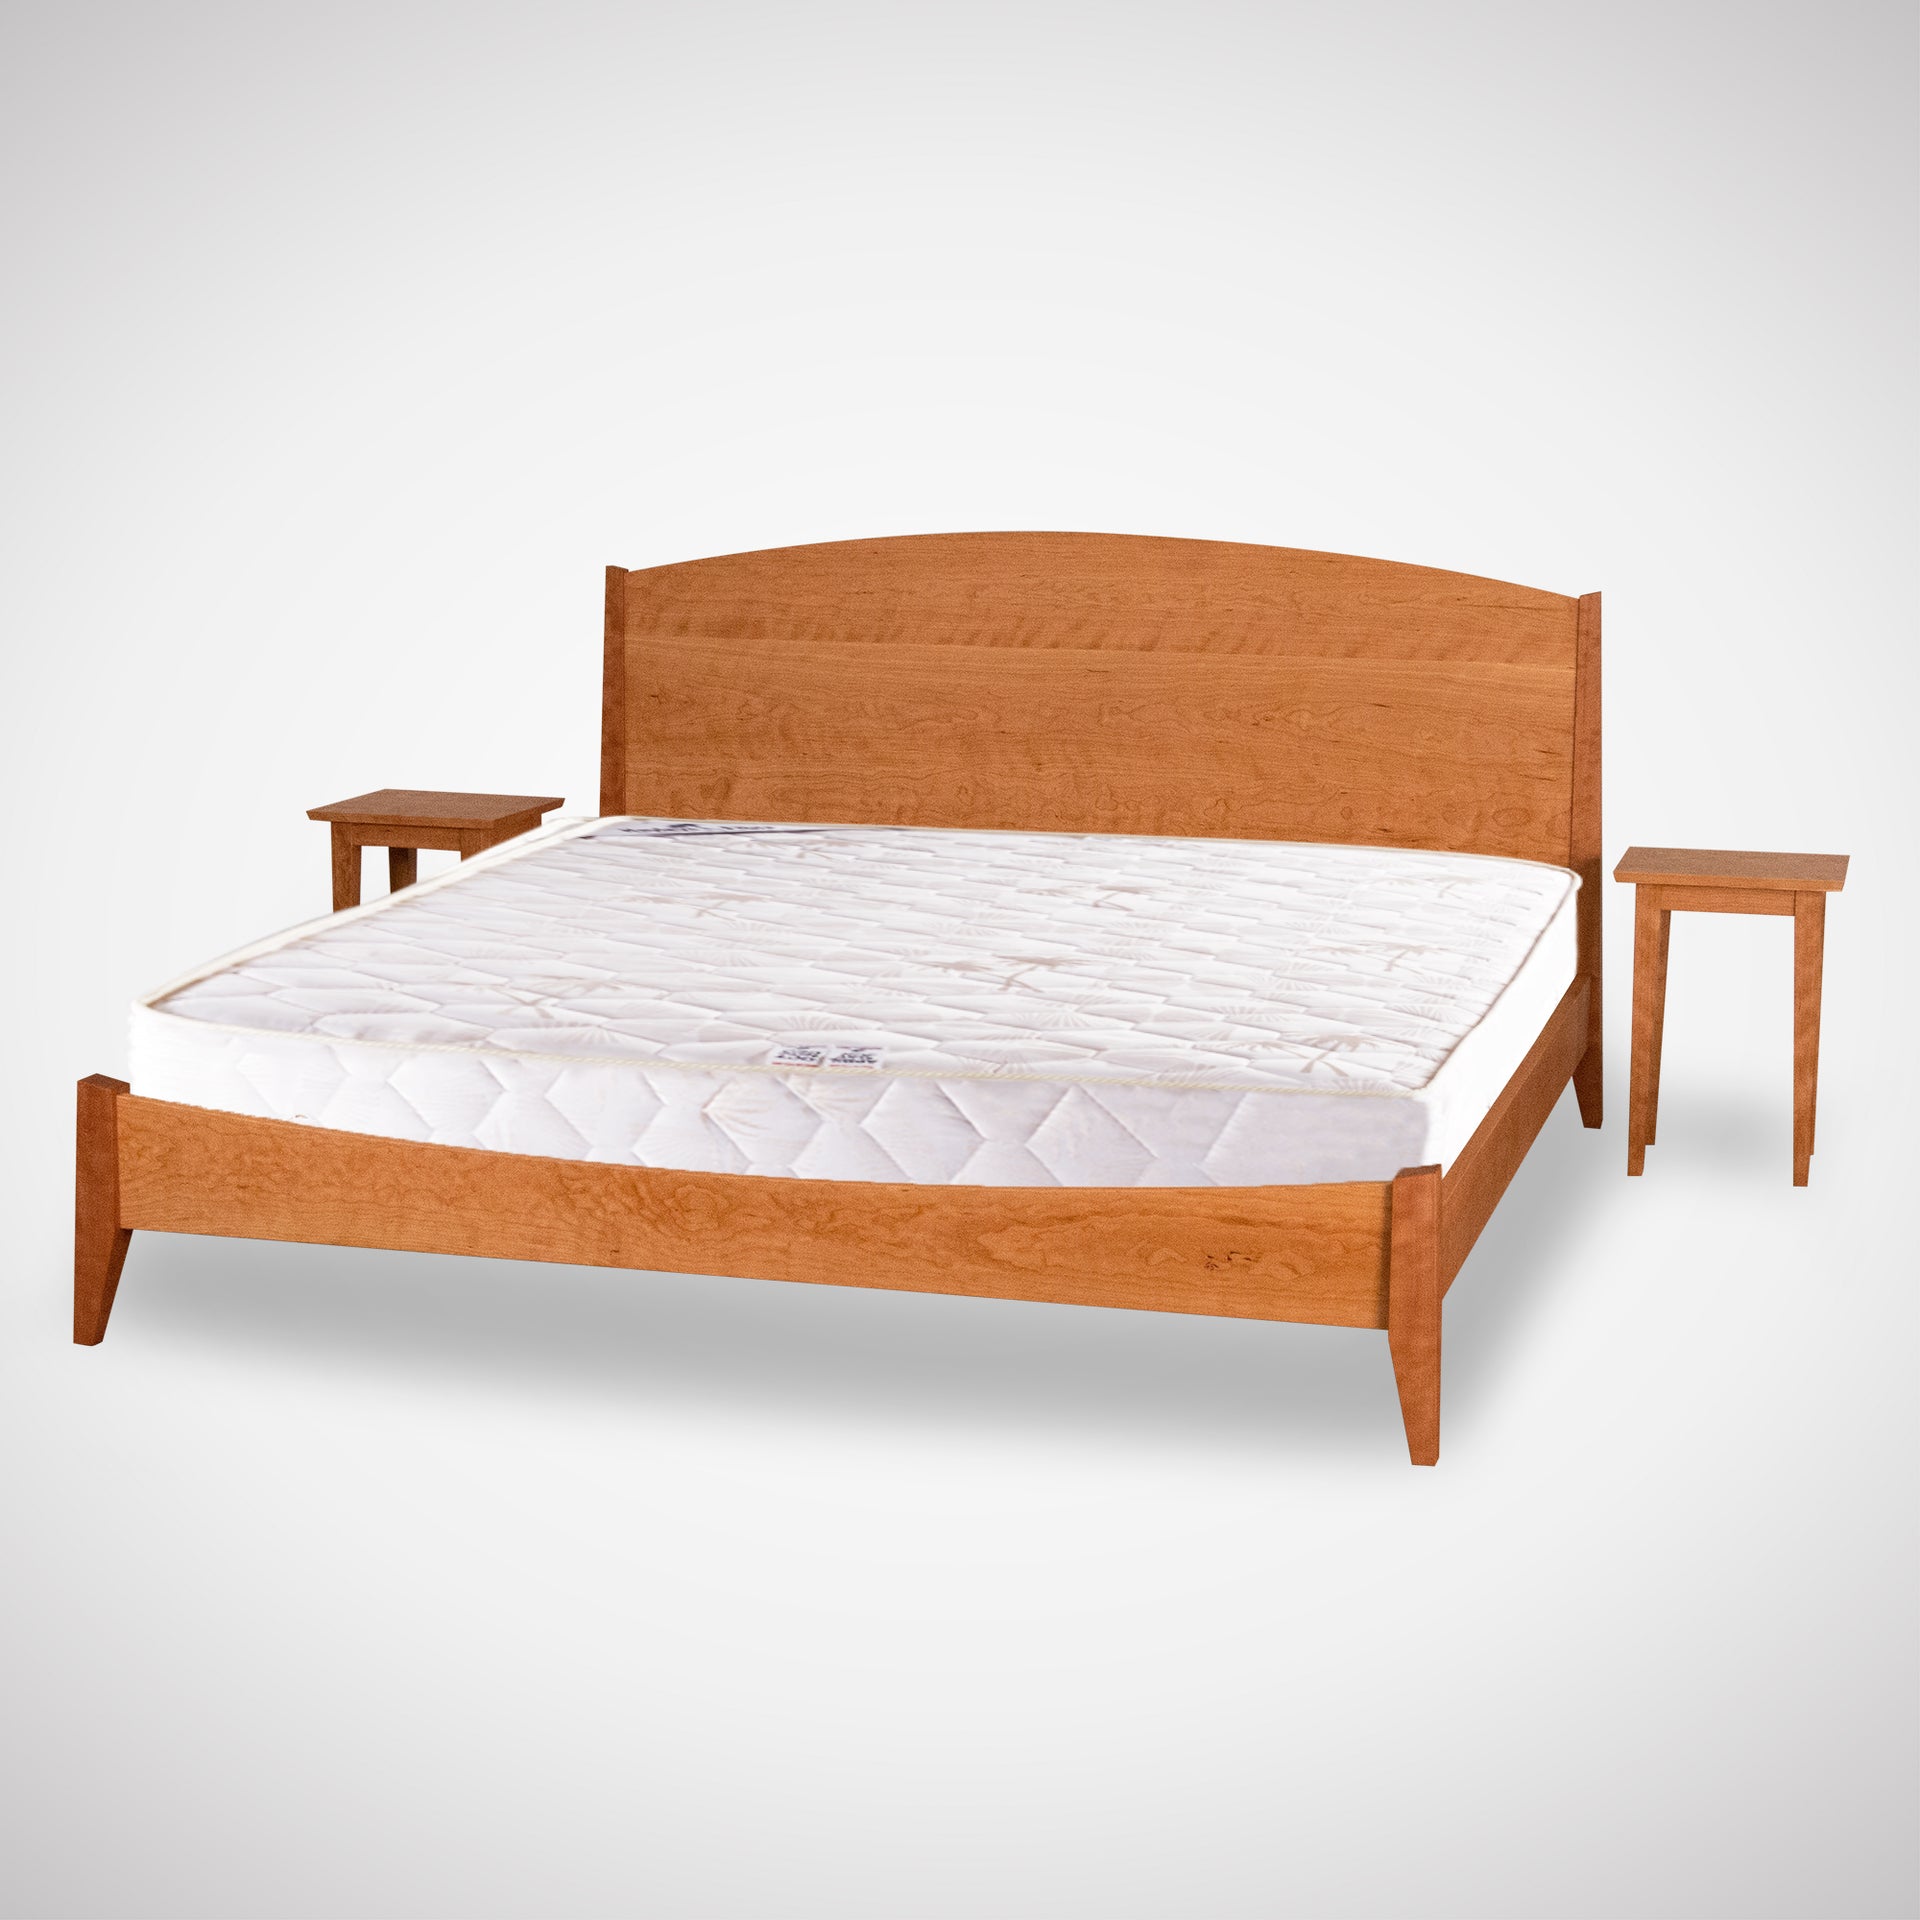 Solid wood platform bed with side tables